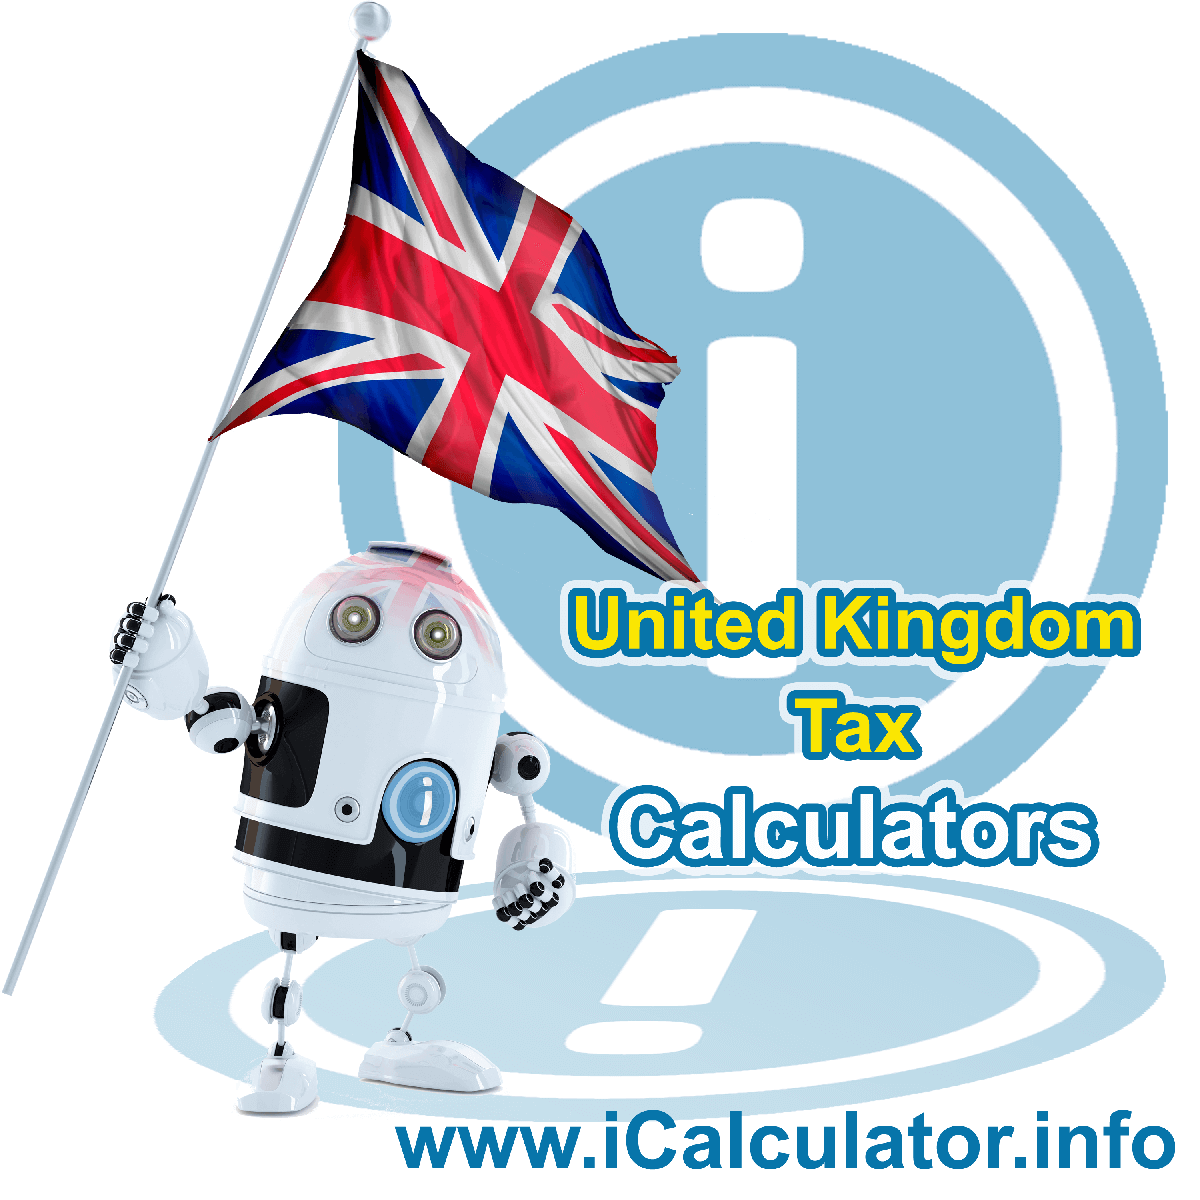 This image shows details about income tax calculations in the UK including national insurance and PAYE formula used to calculate payroll tax in the UK as integrated in the UK Income Tax Calculator for 2022